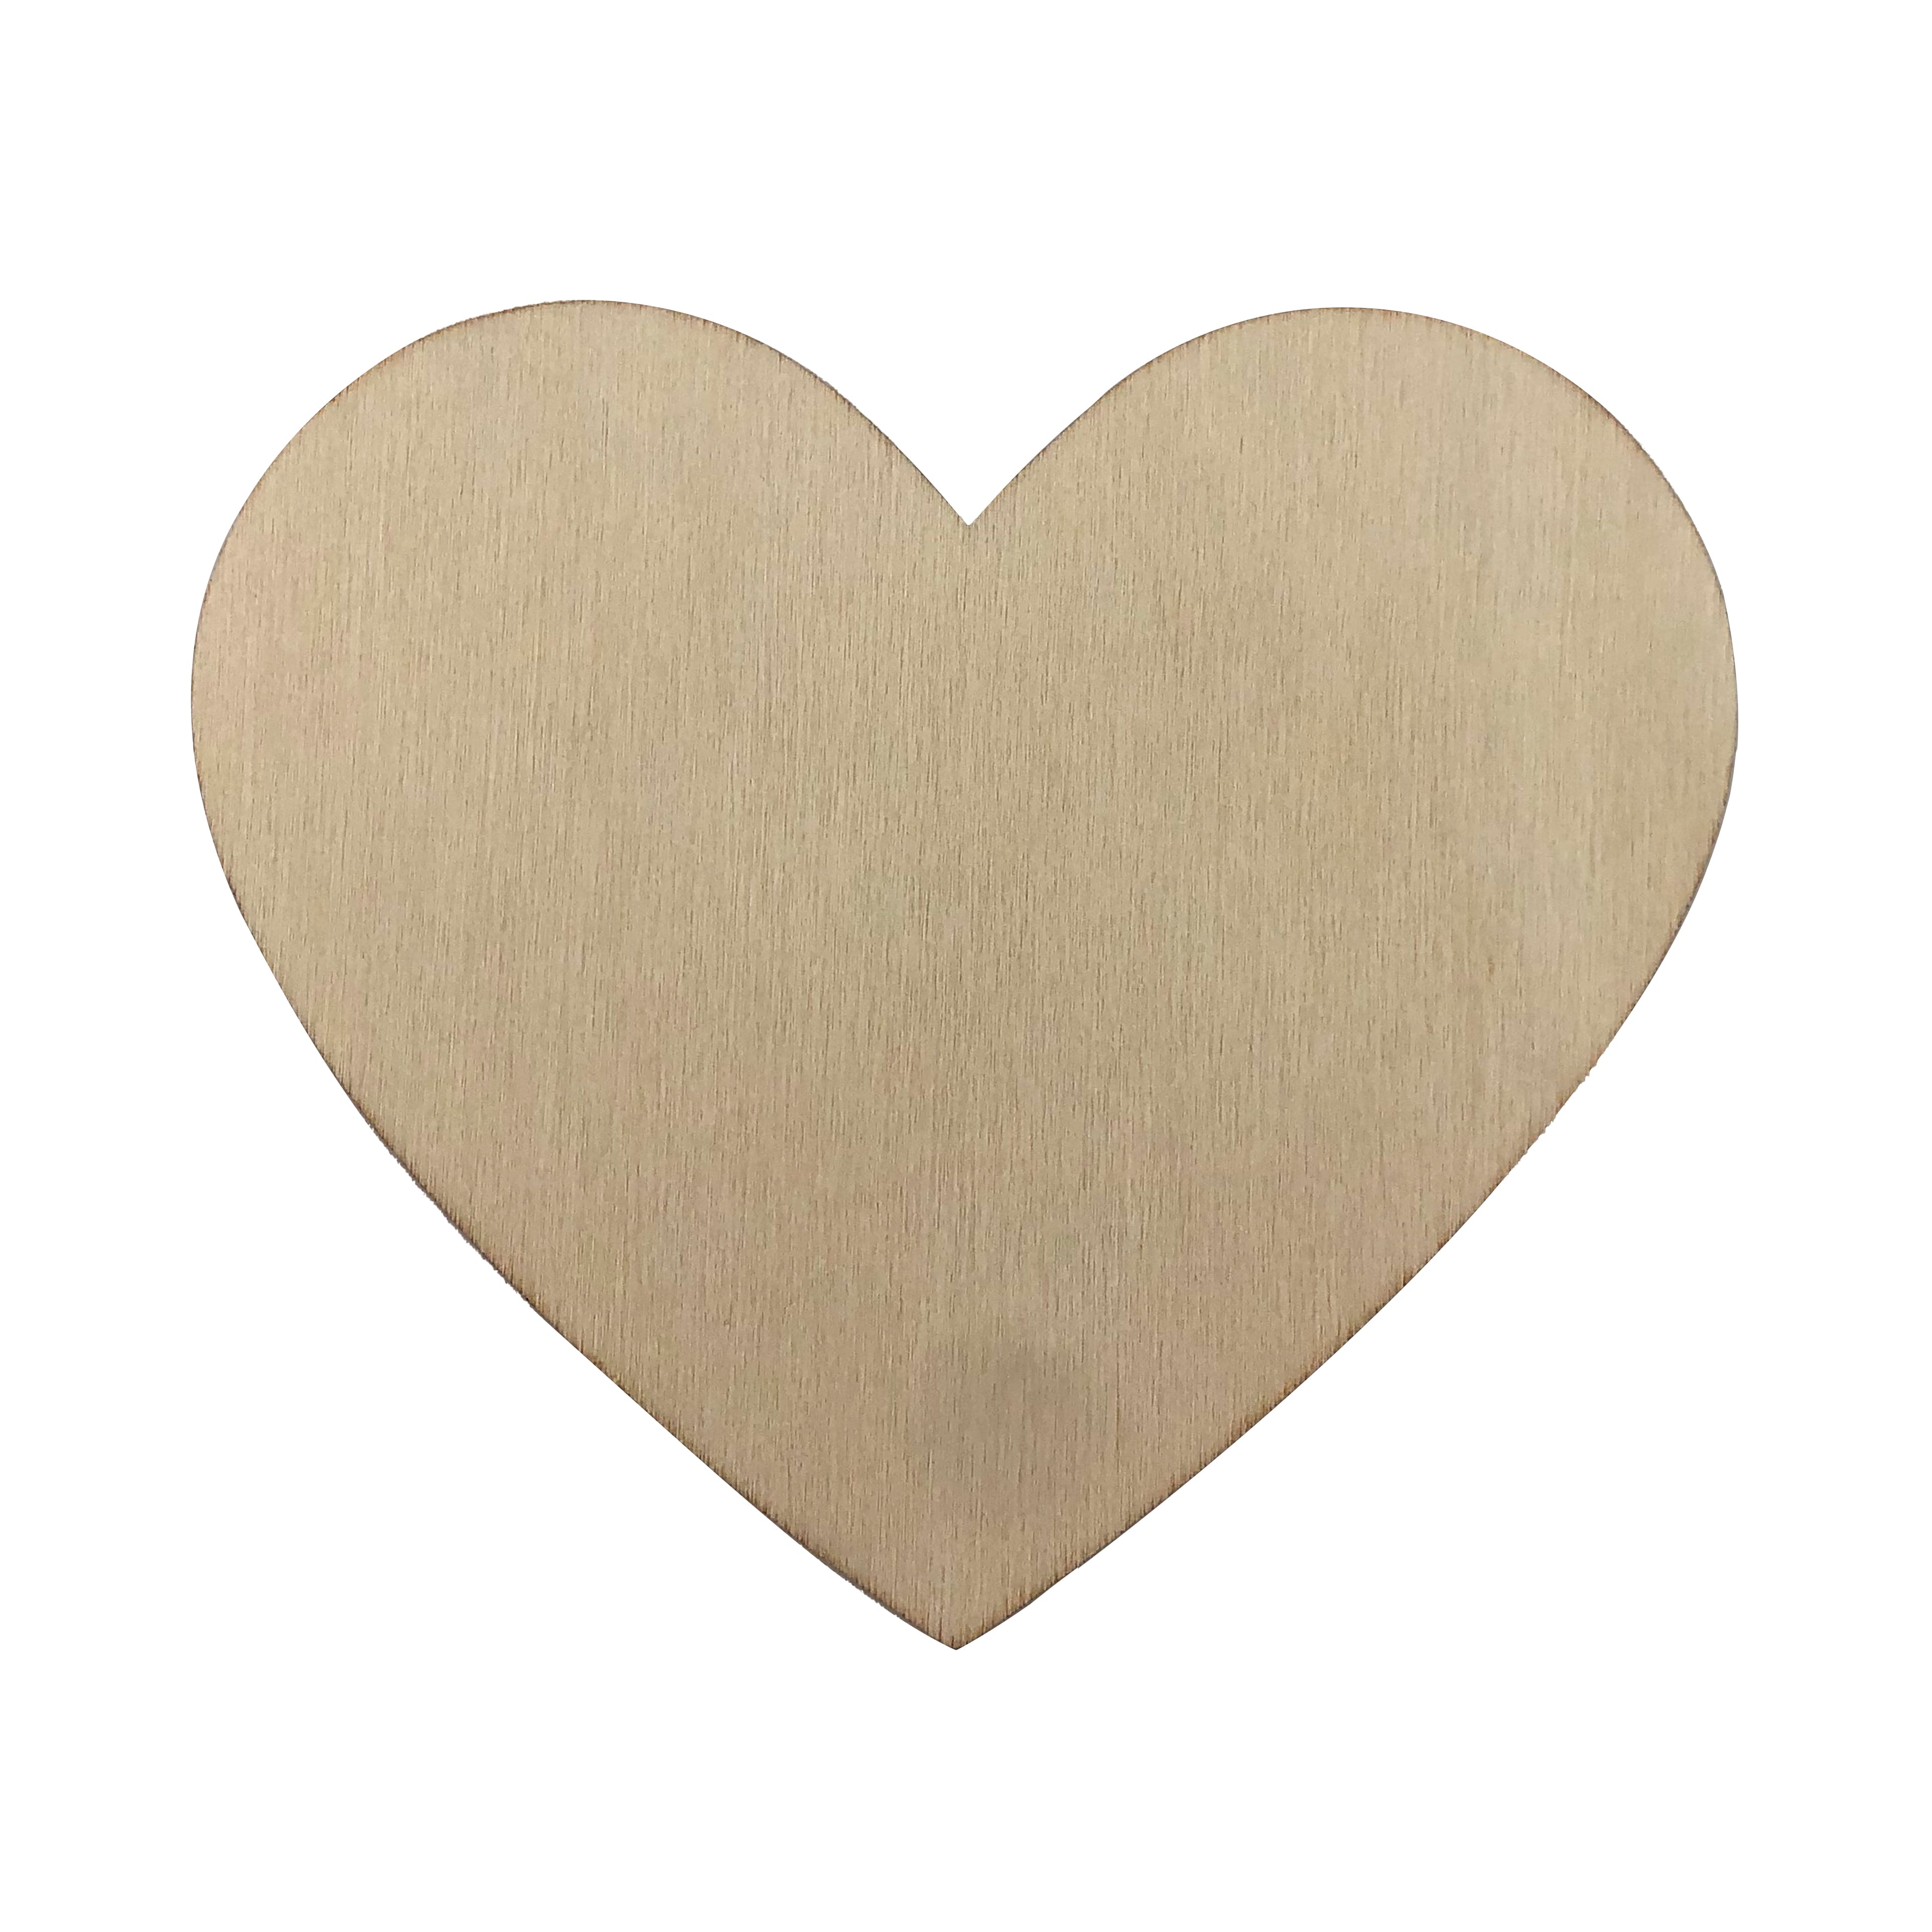 12 Packs: 16 ct. (192 total) Wood Hearts by Make Market&#xAE;